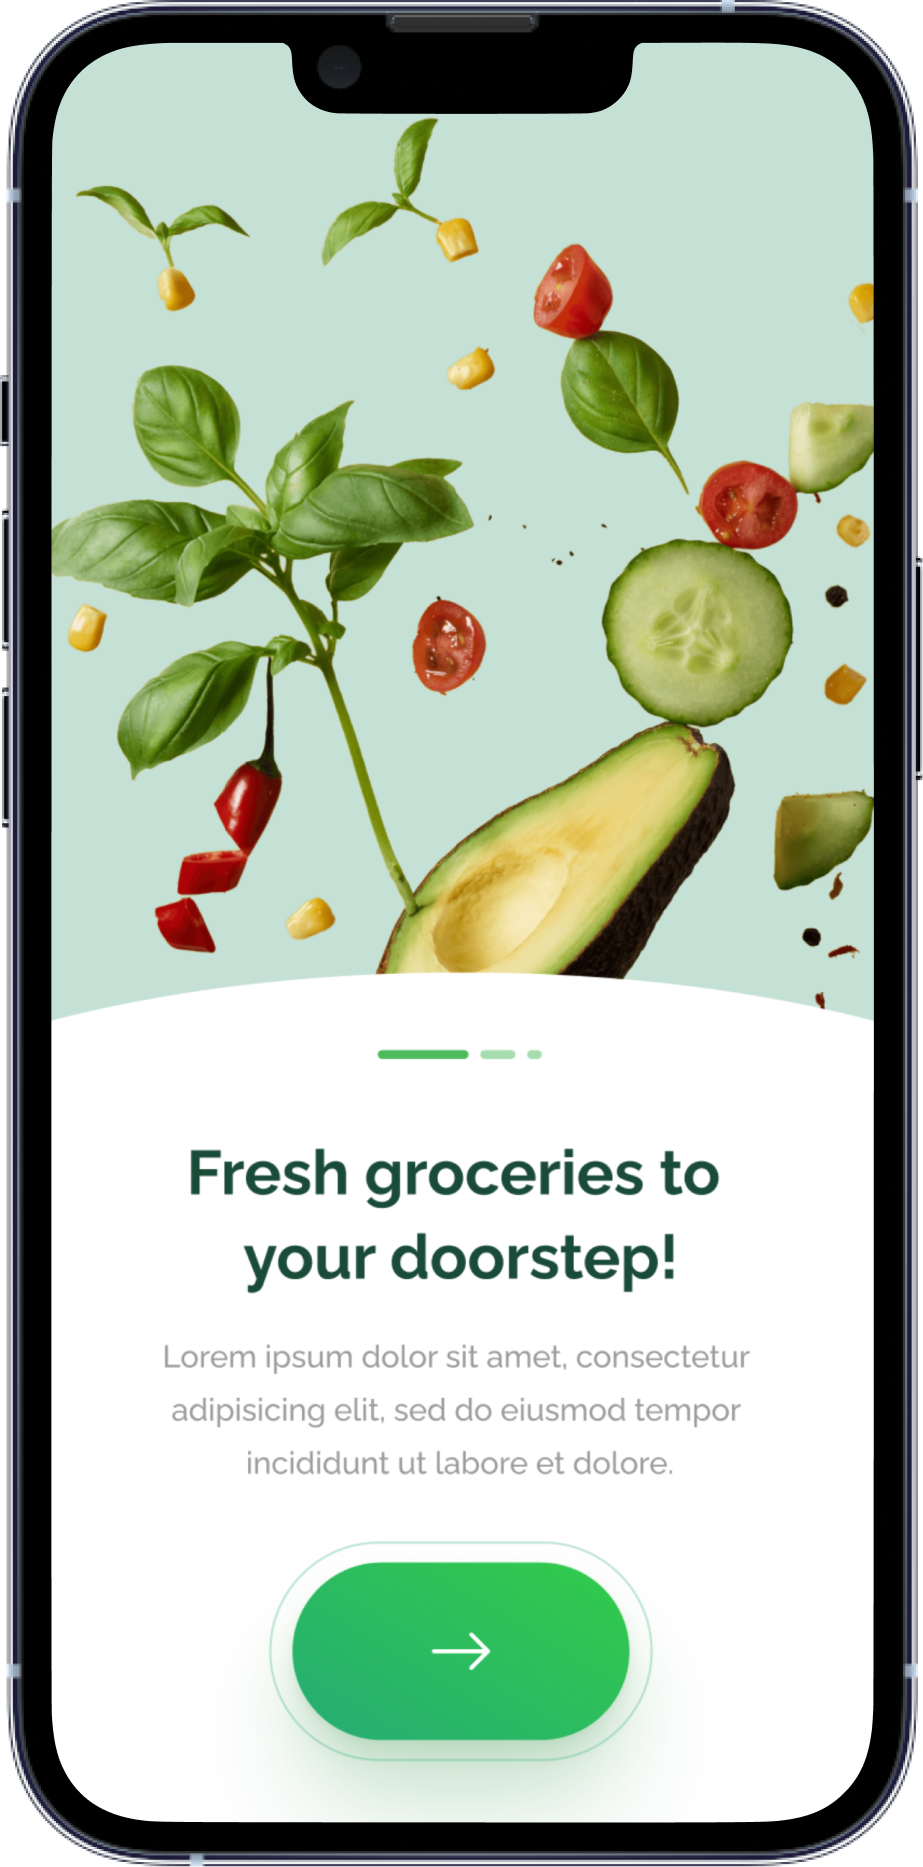 UI of food delivery app